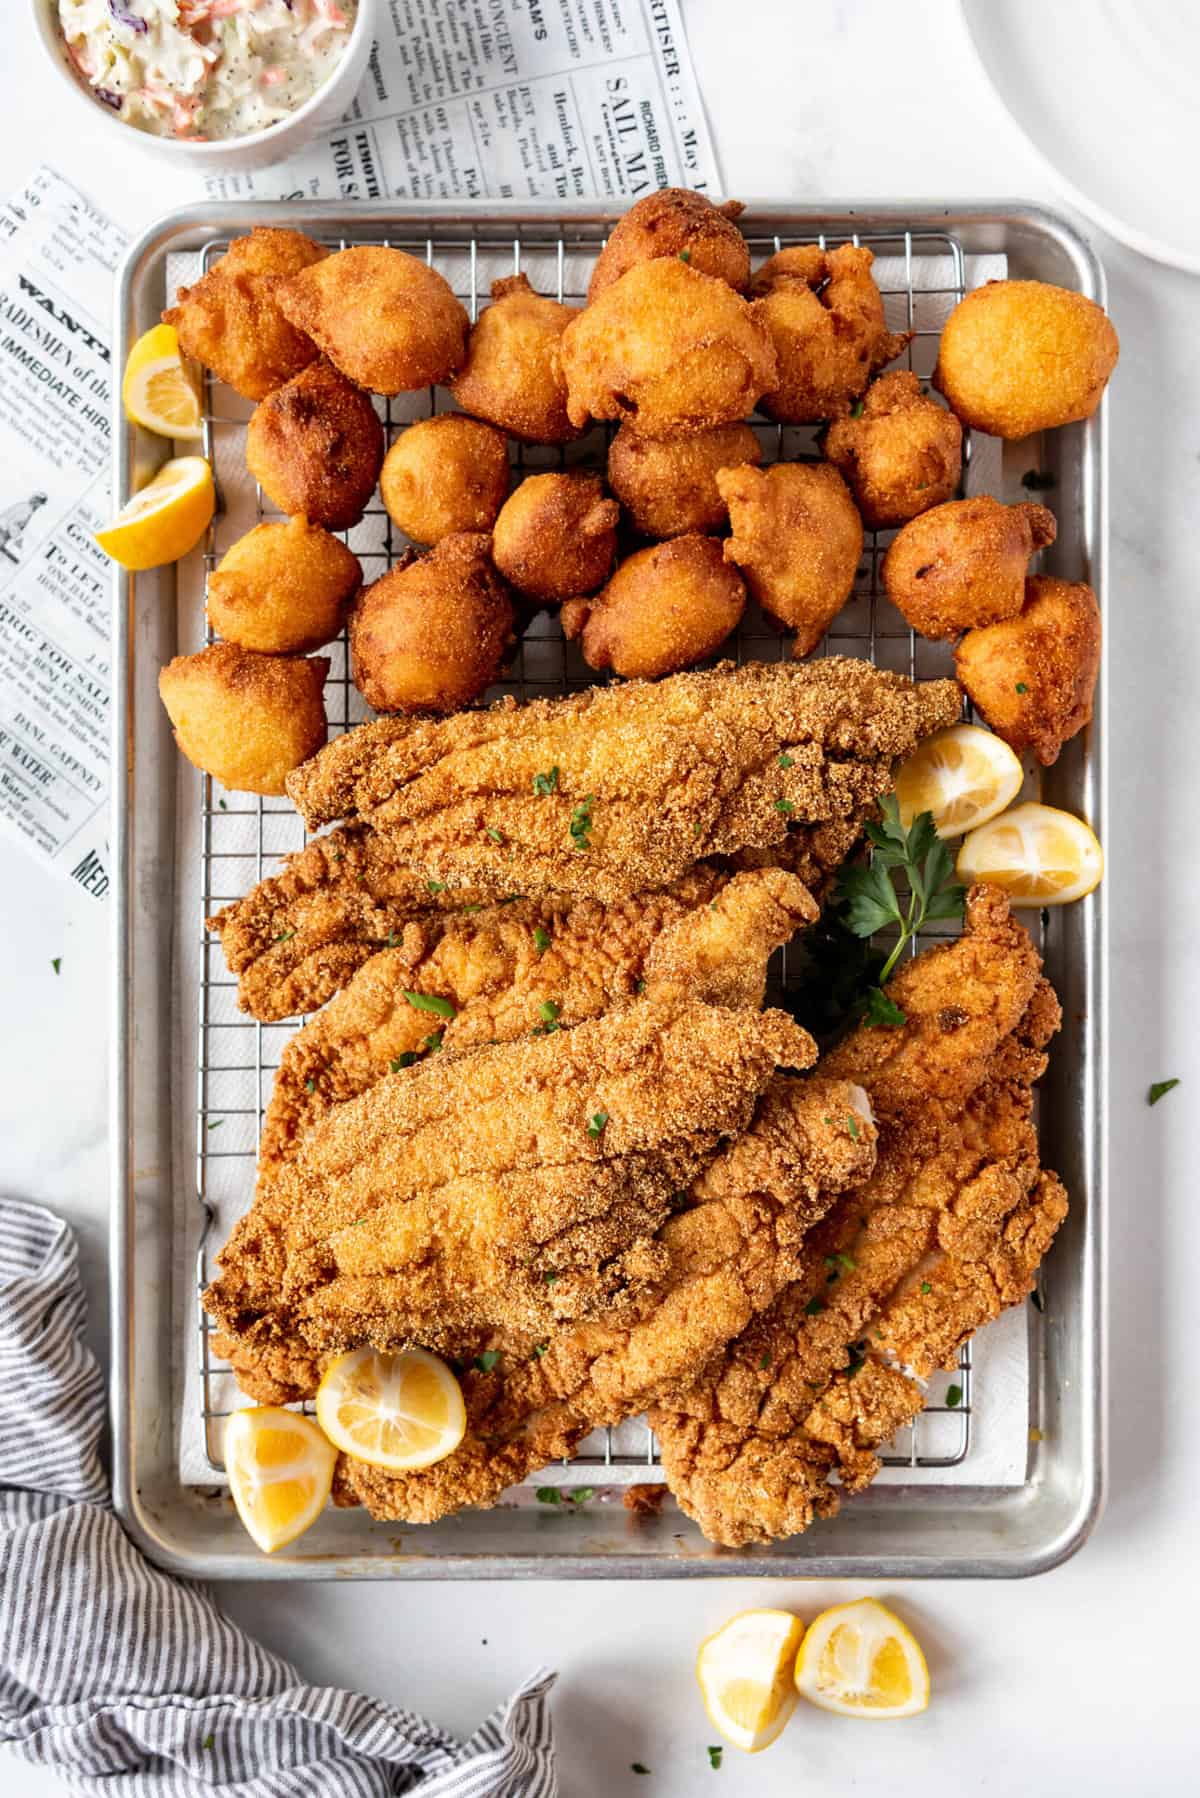 Pieces of fried catfish and fried hush puppies on a baking sheet.